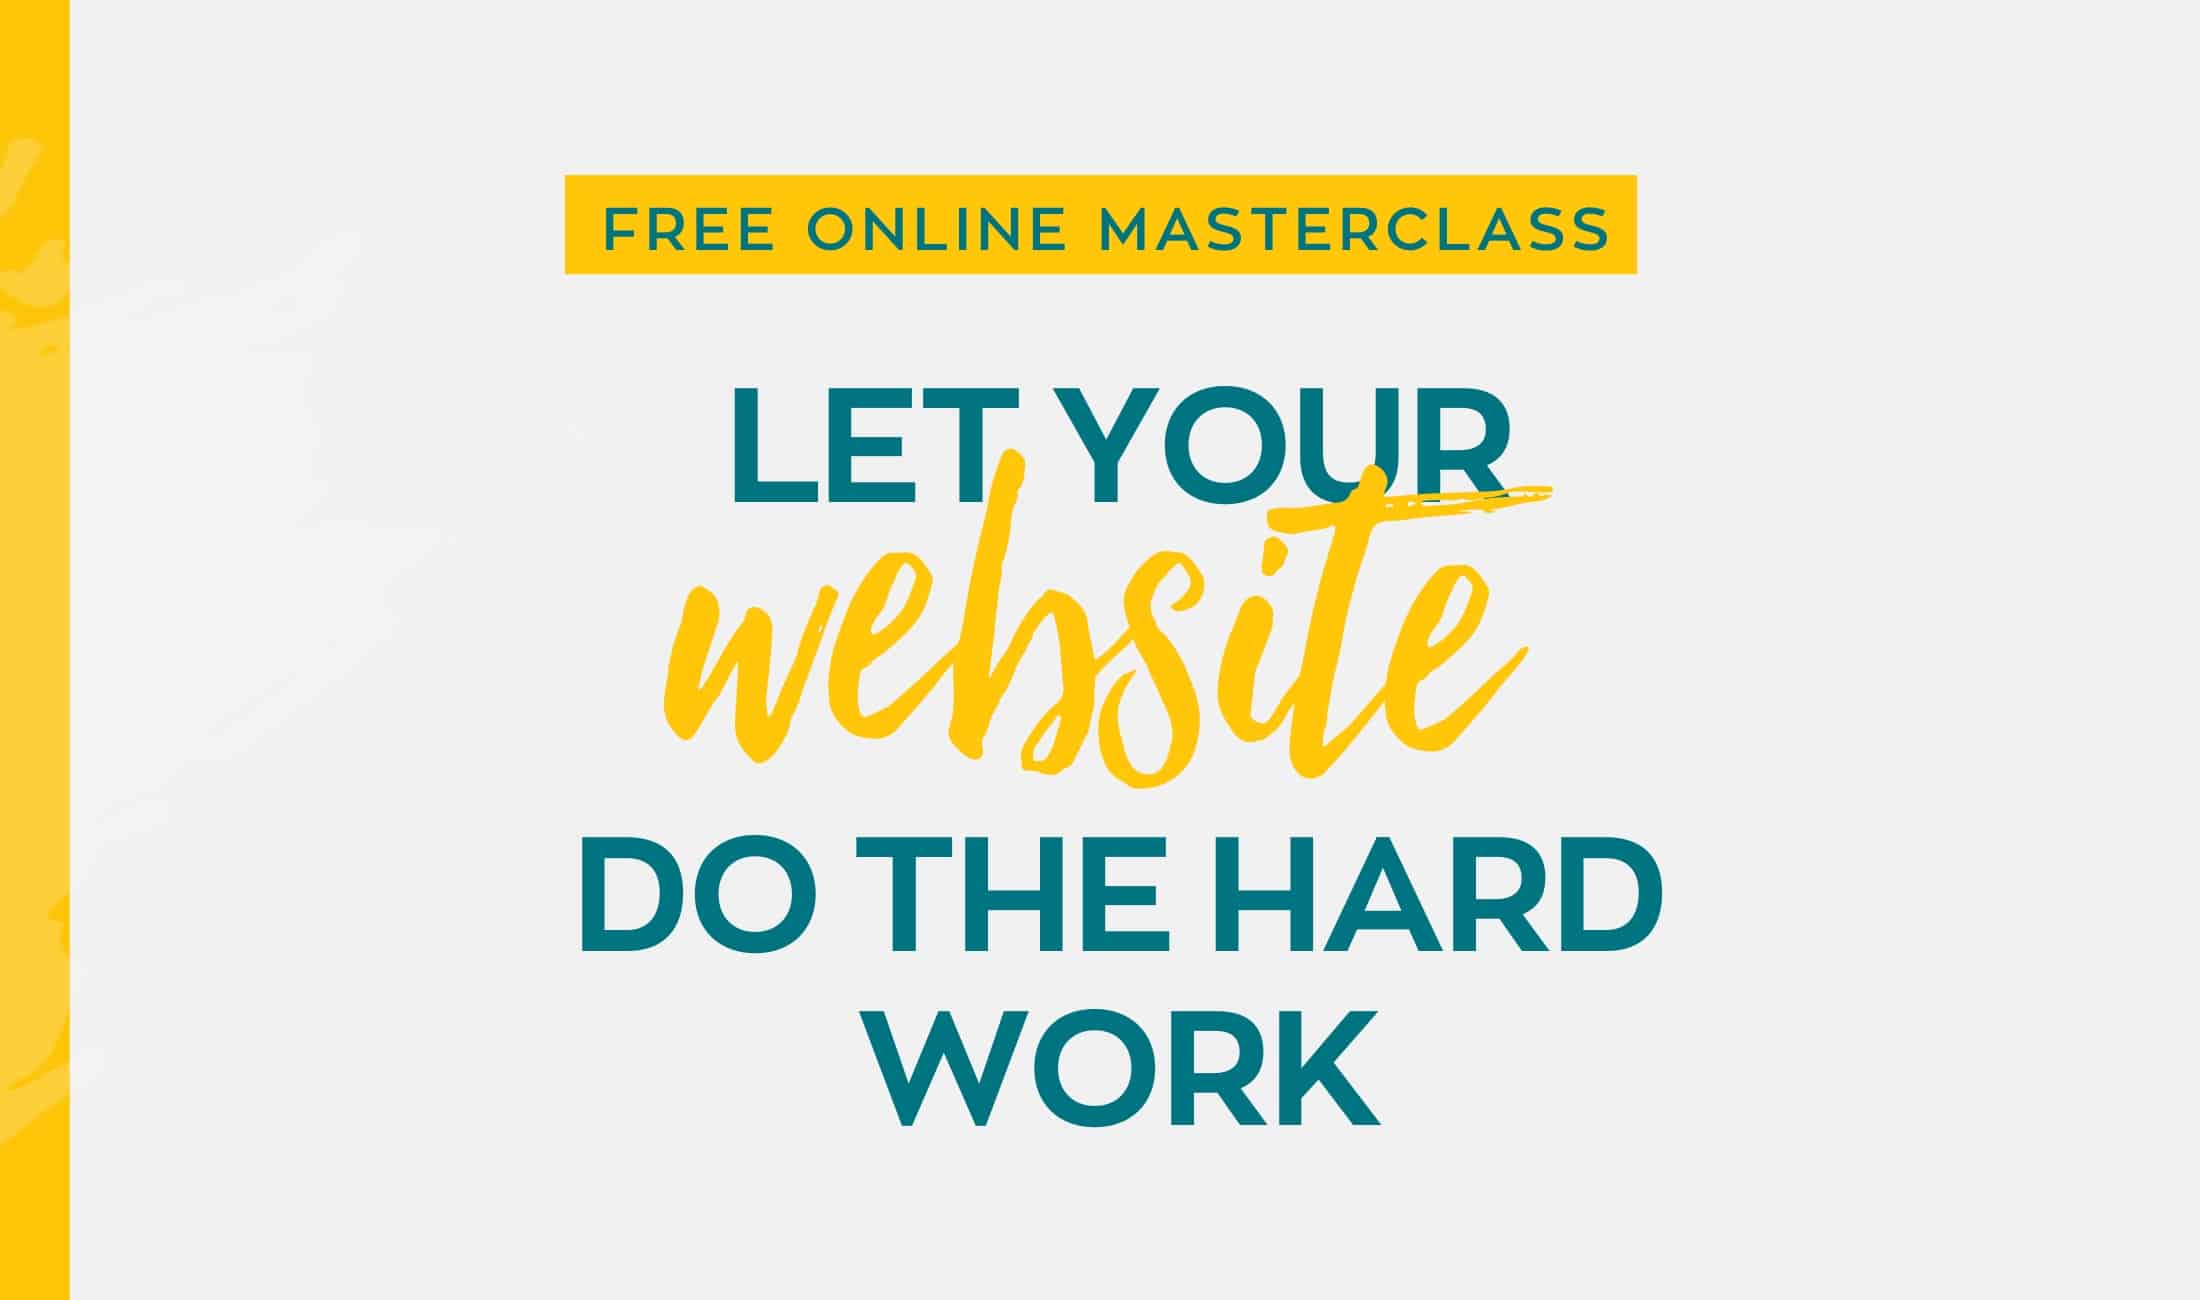 Masterclass - Let your website do the hard work - PF